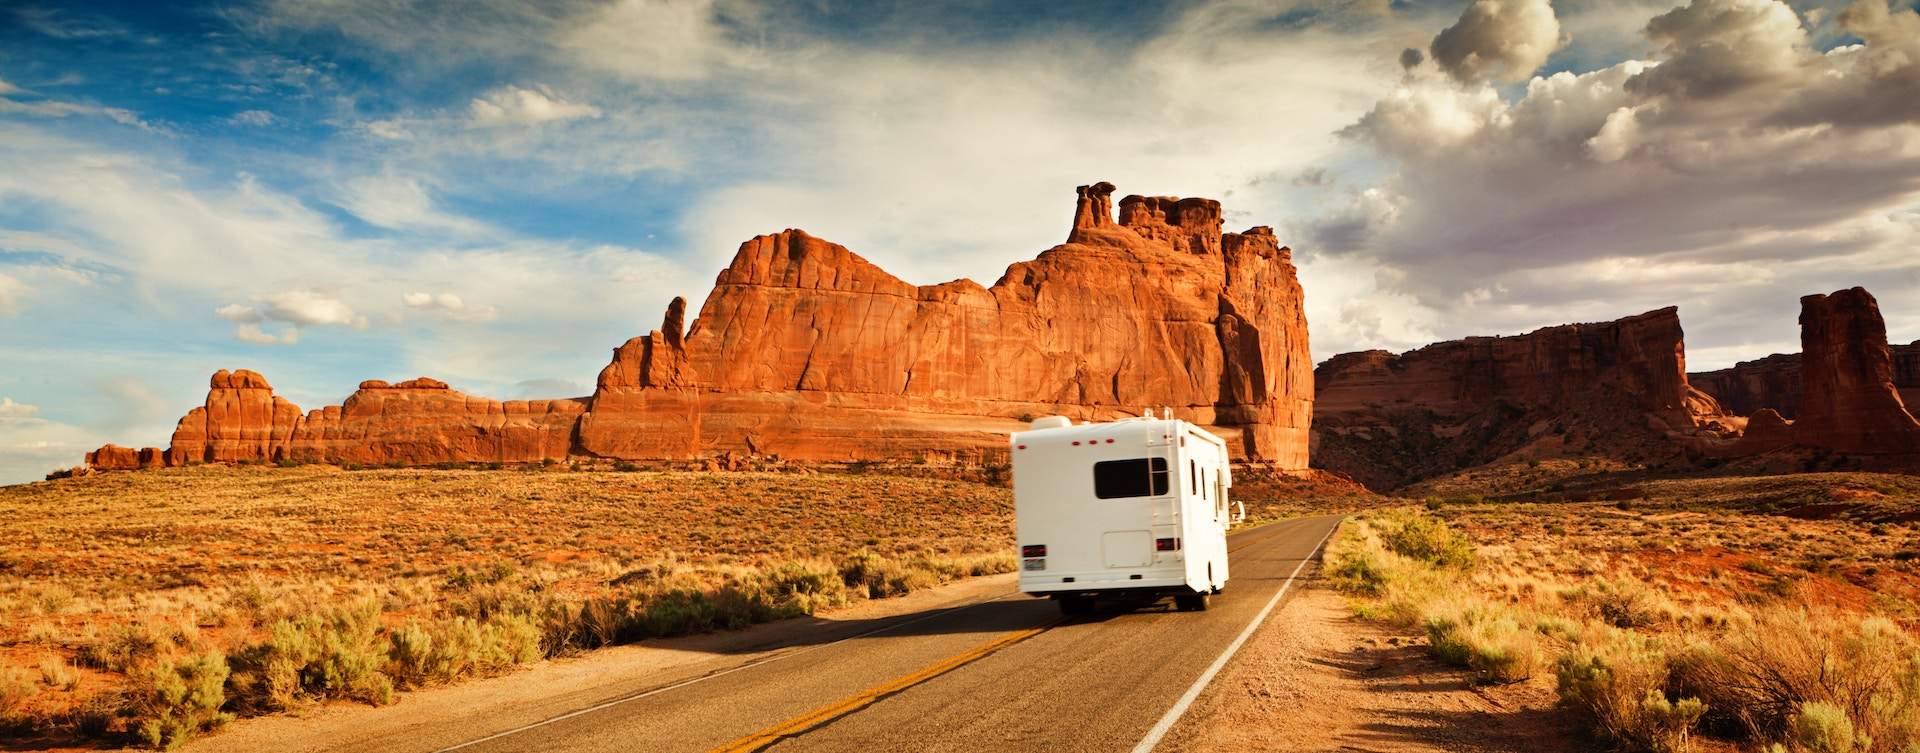 The Complete Guide to Nude Camping and Nudist RV Parks